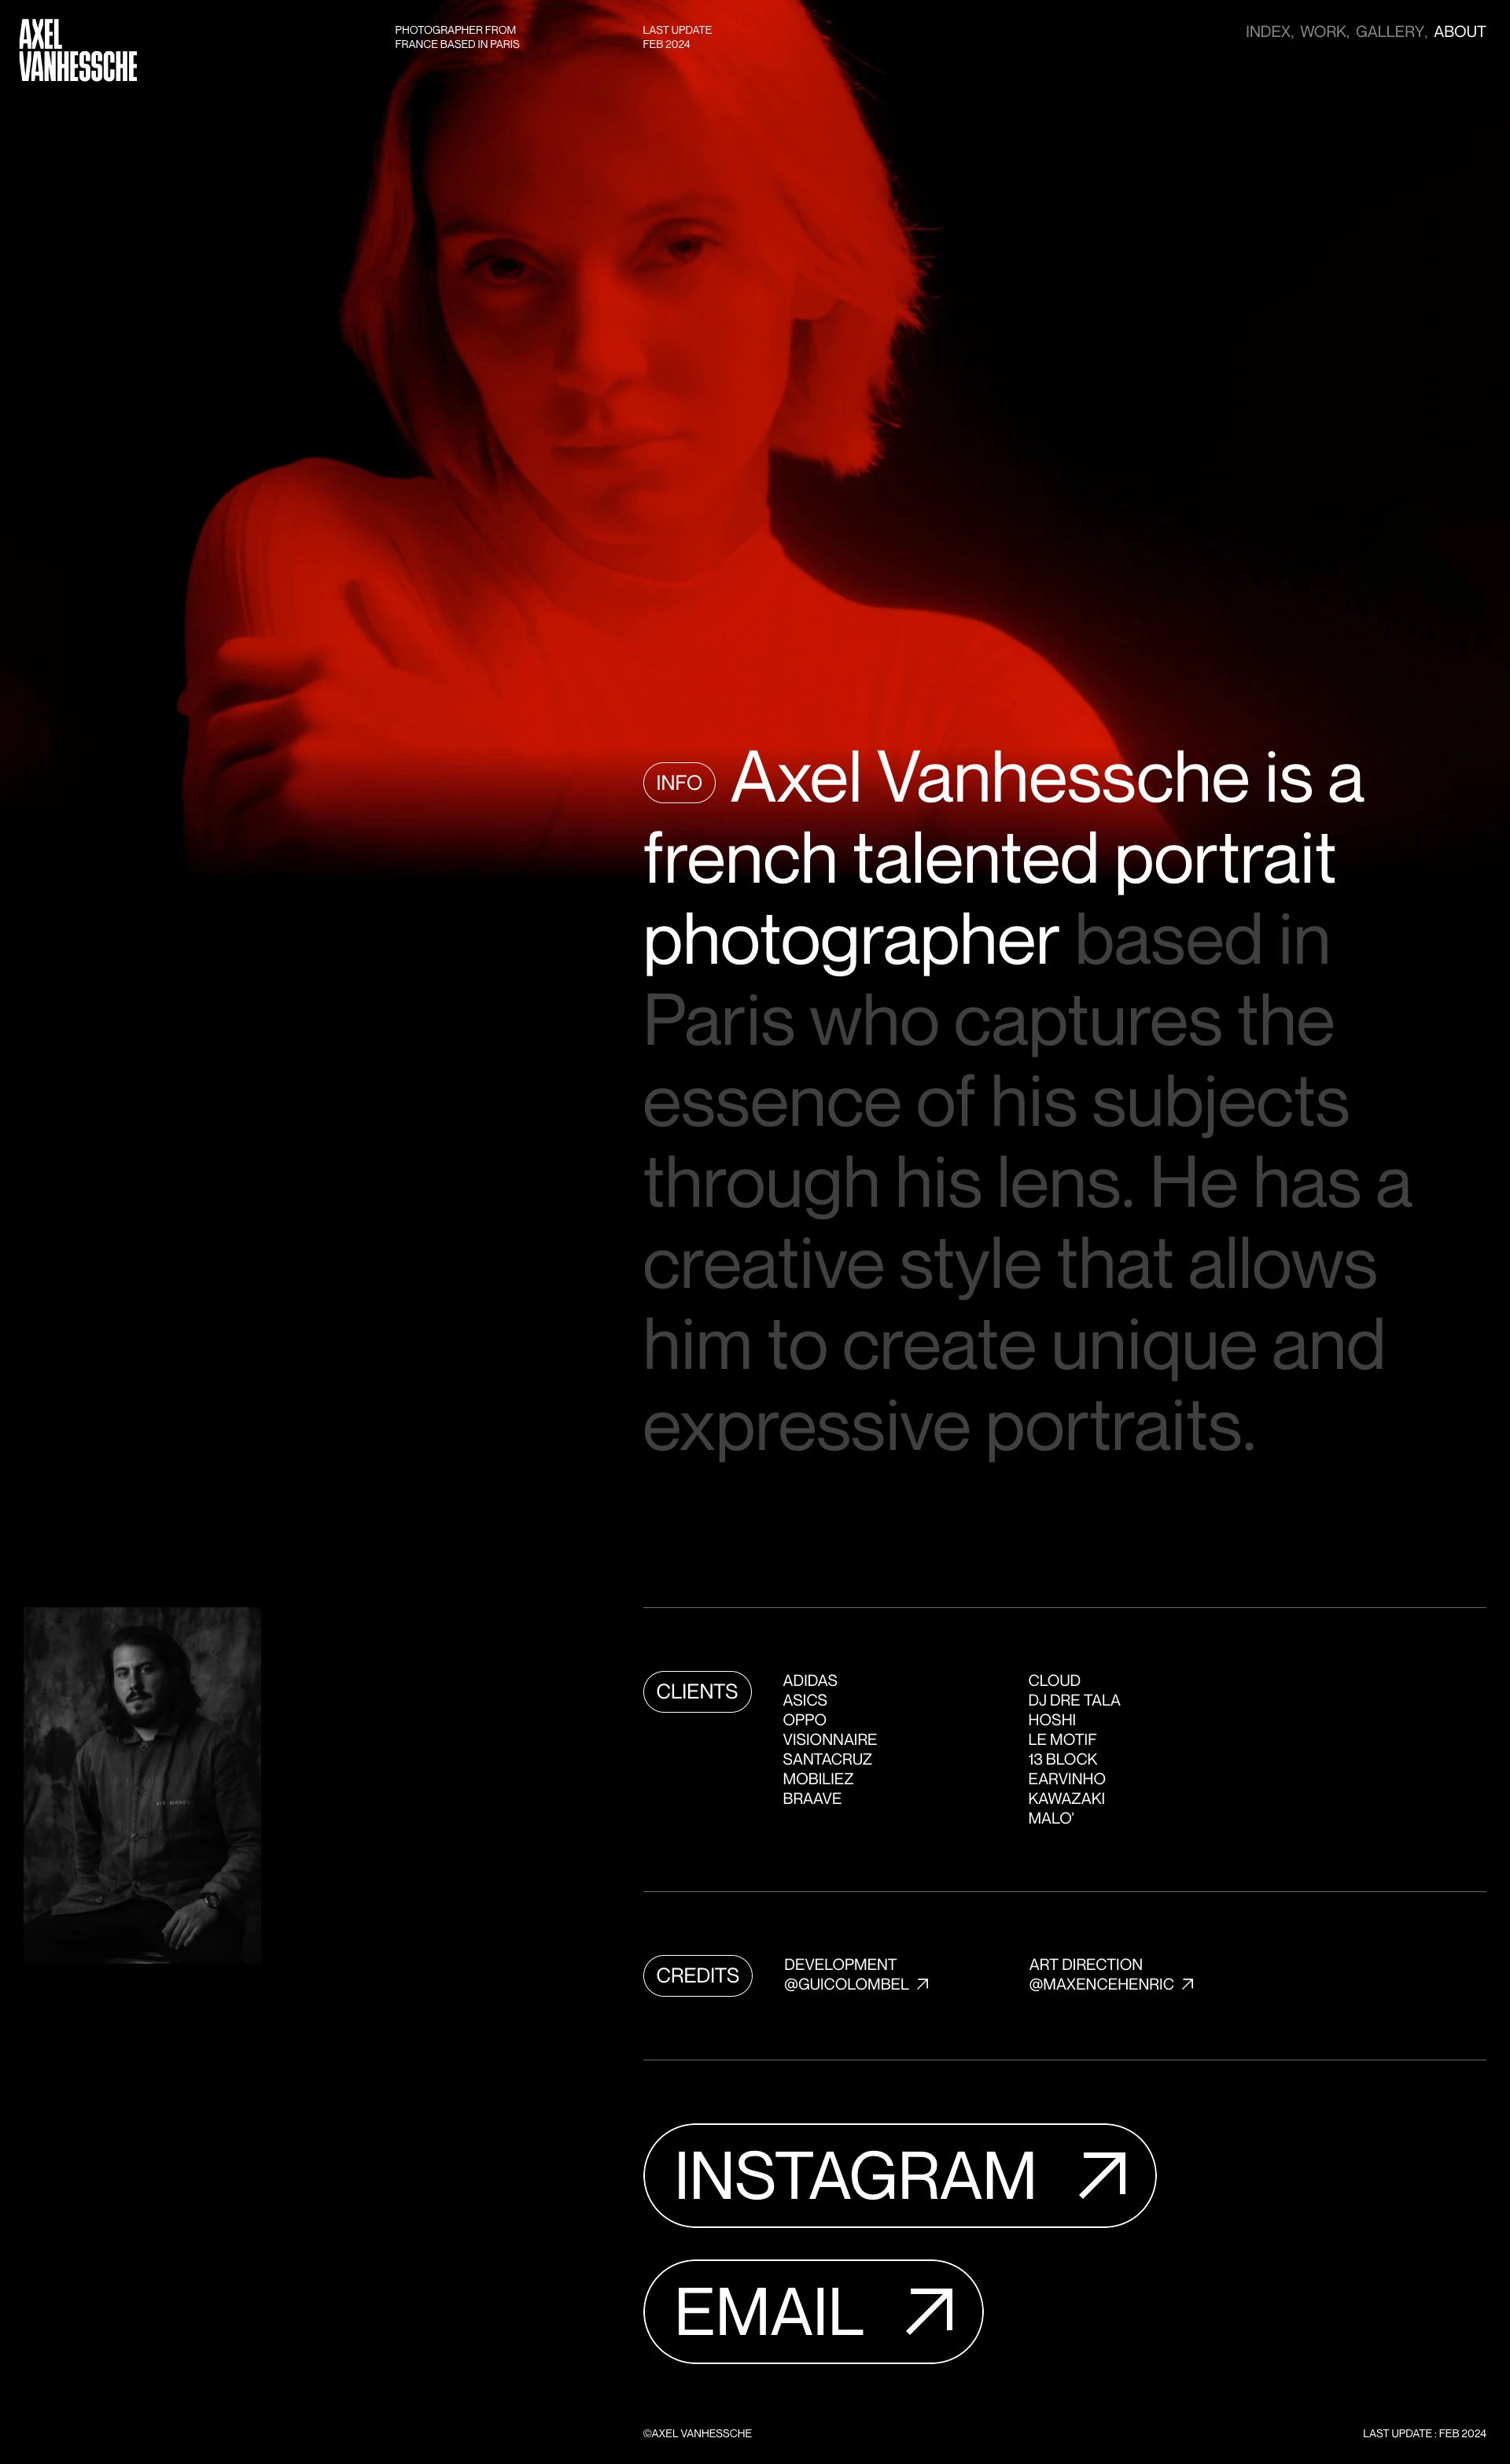 Axel Vanhessche Landing Page Example: Axel Vanhessche is a french talented portrait photographer based in Paris who captures the essence of his subjects through his lens.